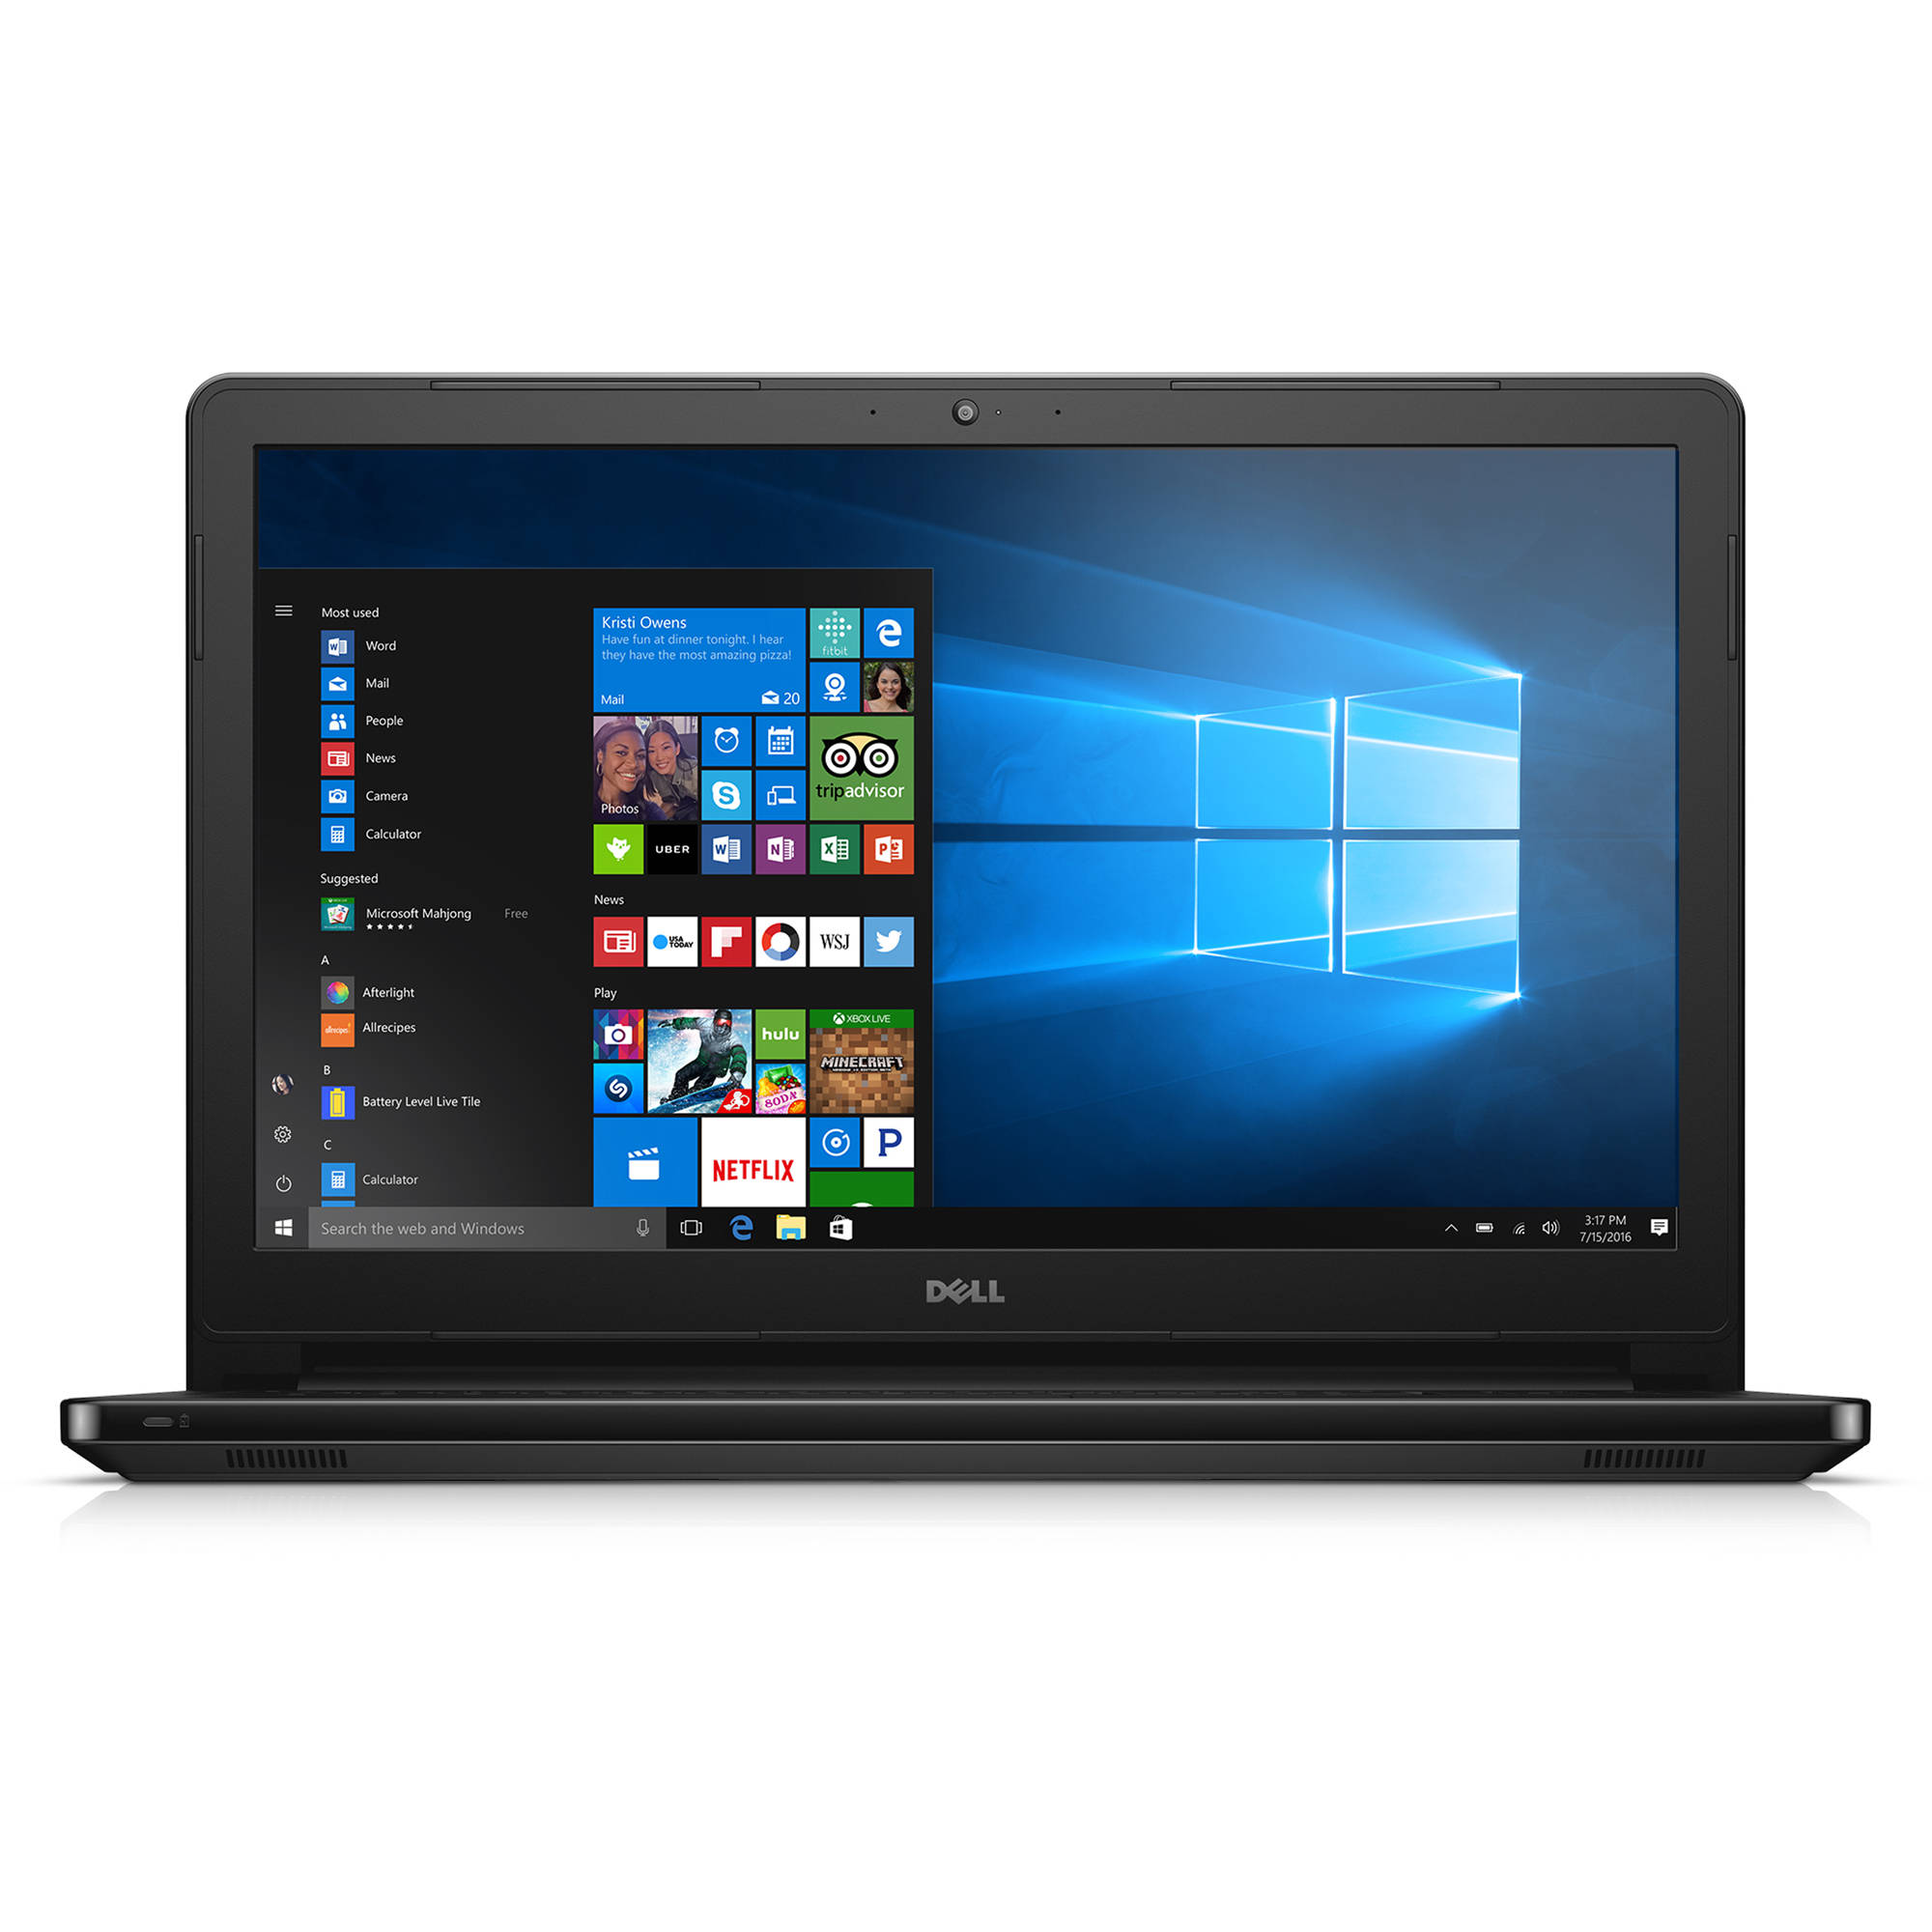 Dell Inspiron 15 5557 Notebook